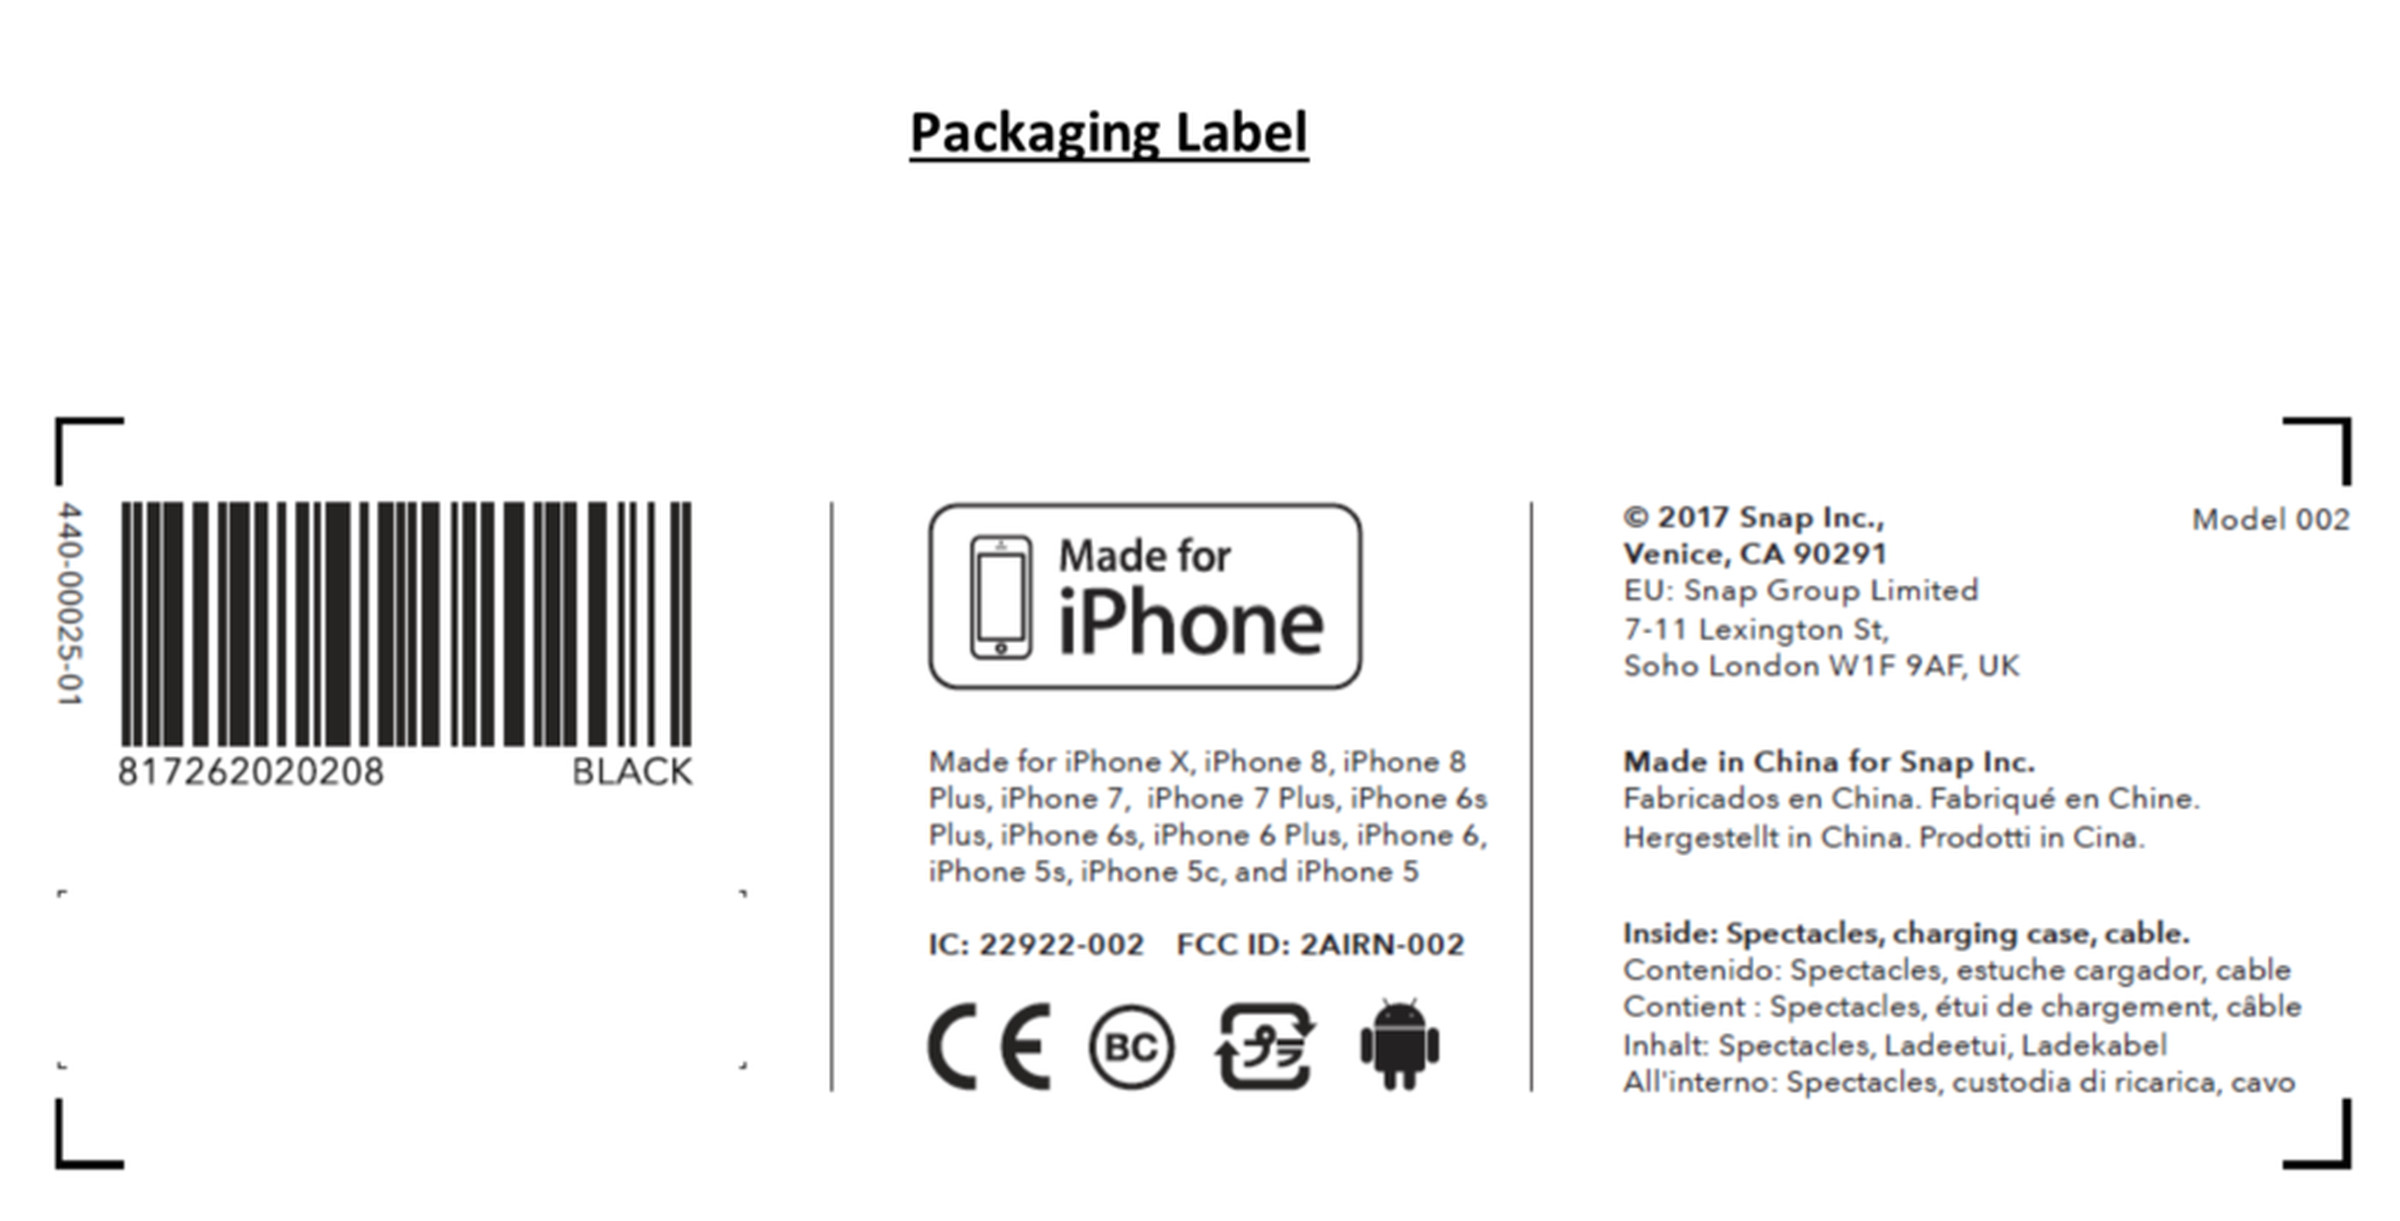 Packing label discovered in FCC documents showing Model 002.